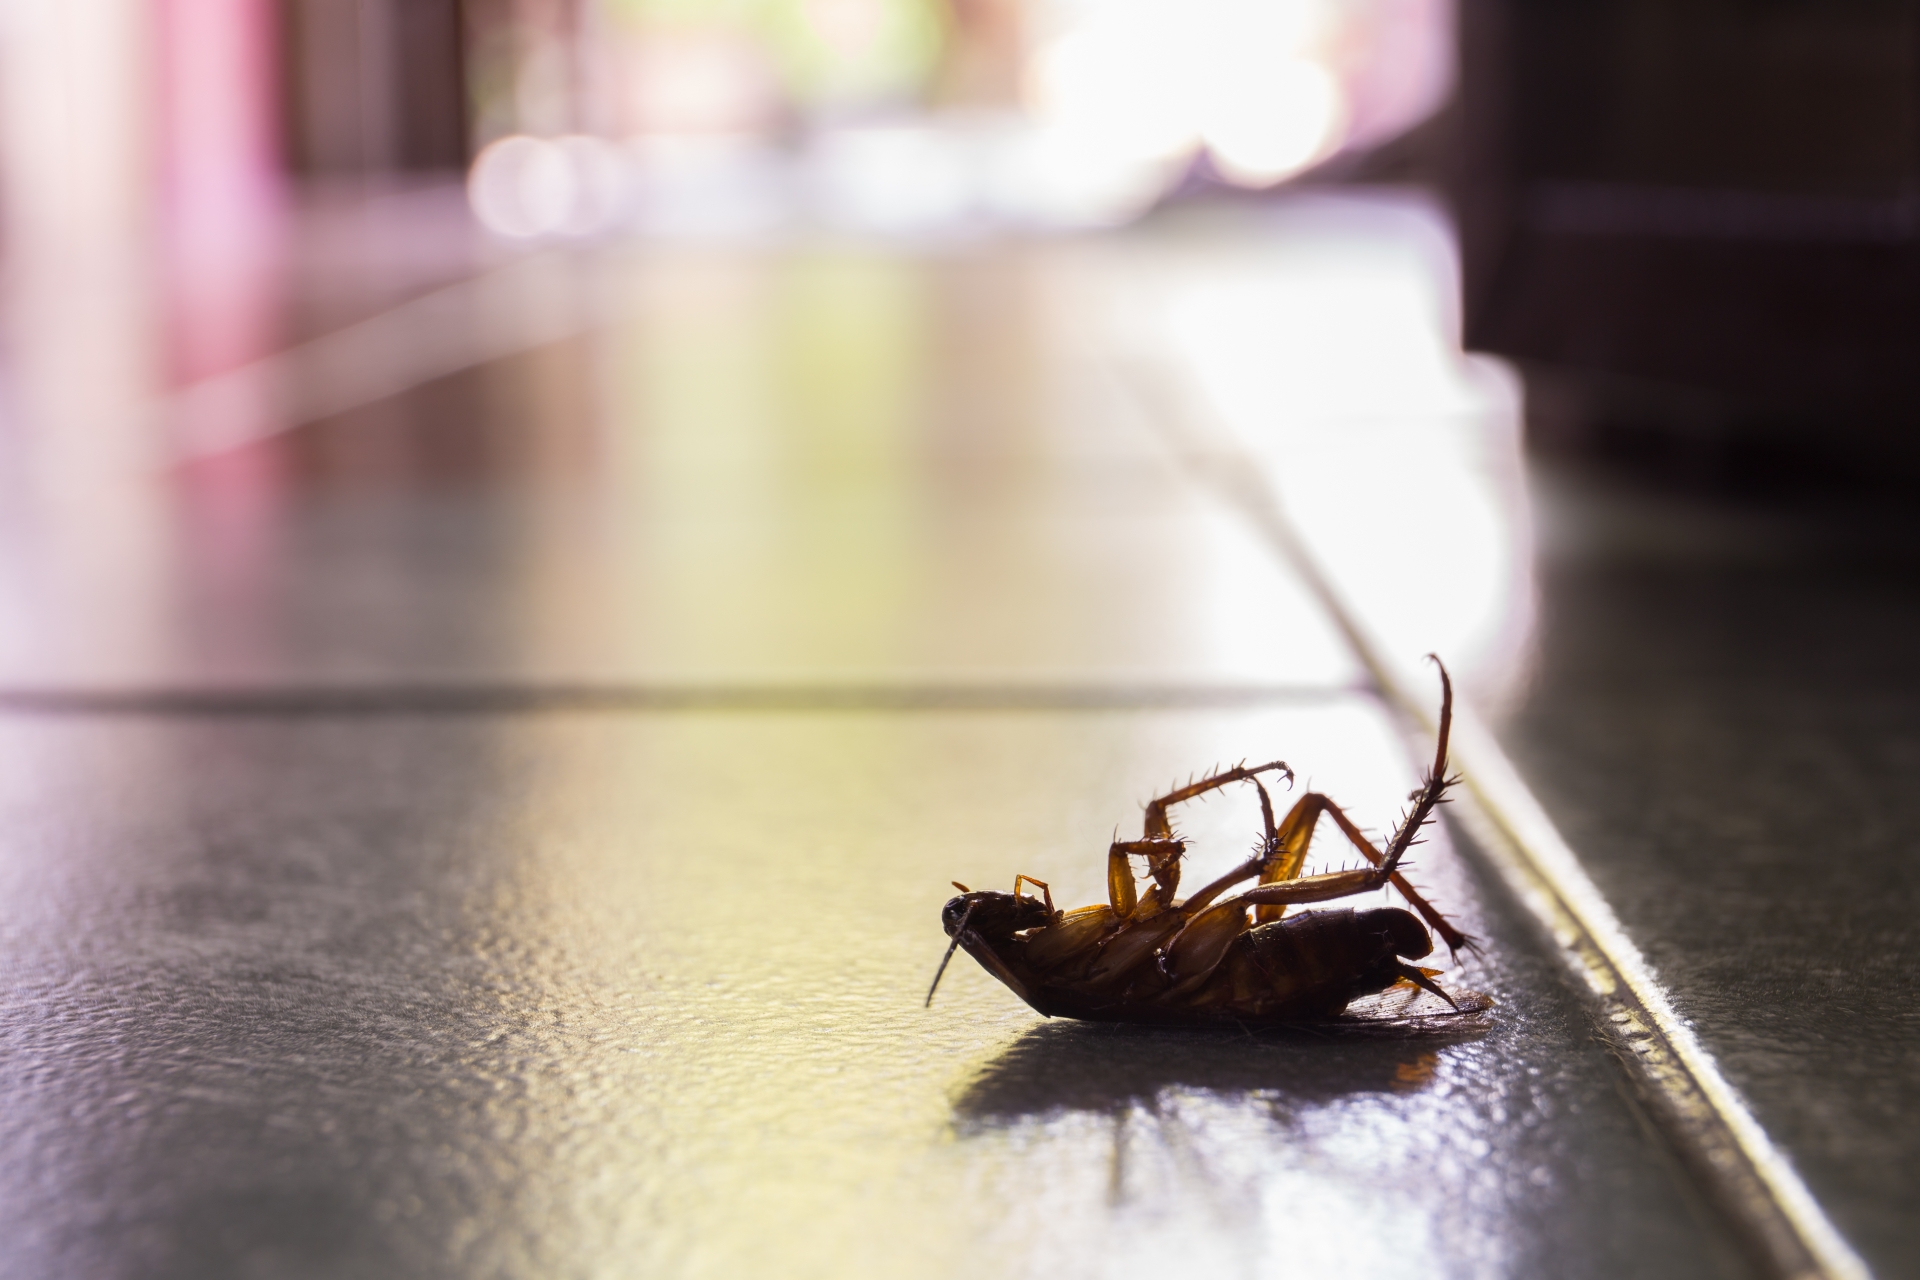 Cockroach Control, Pest Control in Highgate, N6. Call Now 020 8166 9746